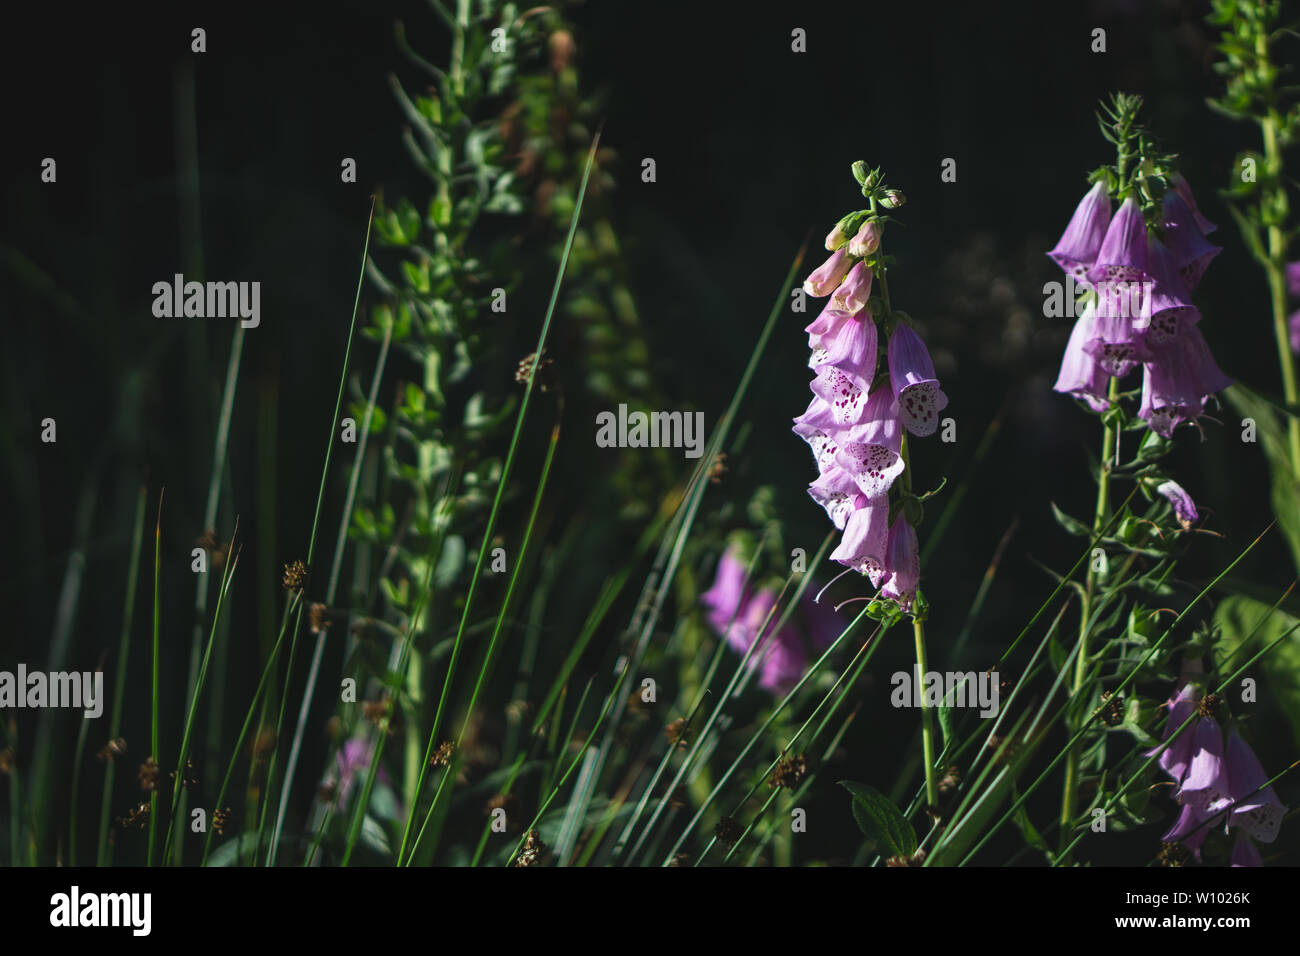 Digitalis in the forrest at sunset Stock Photo